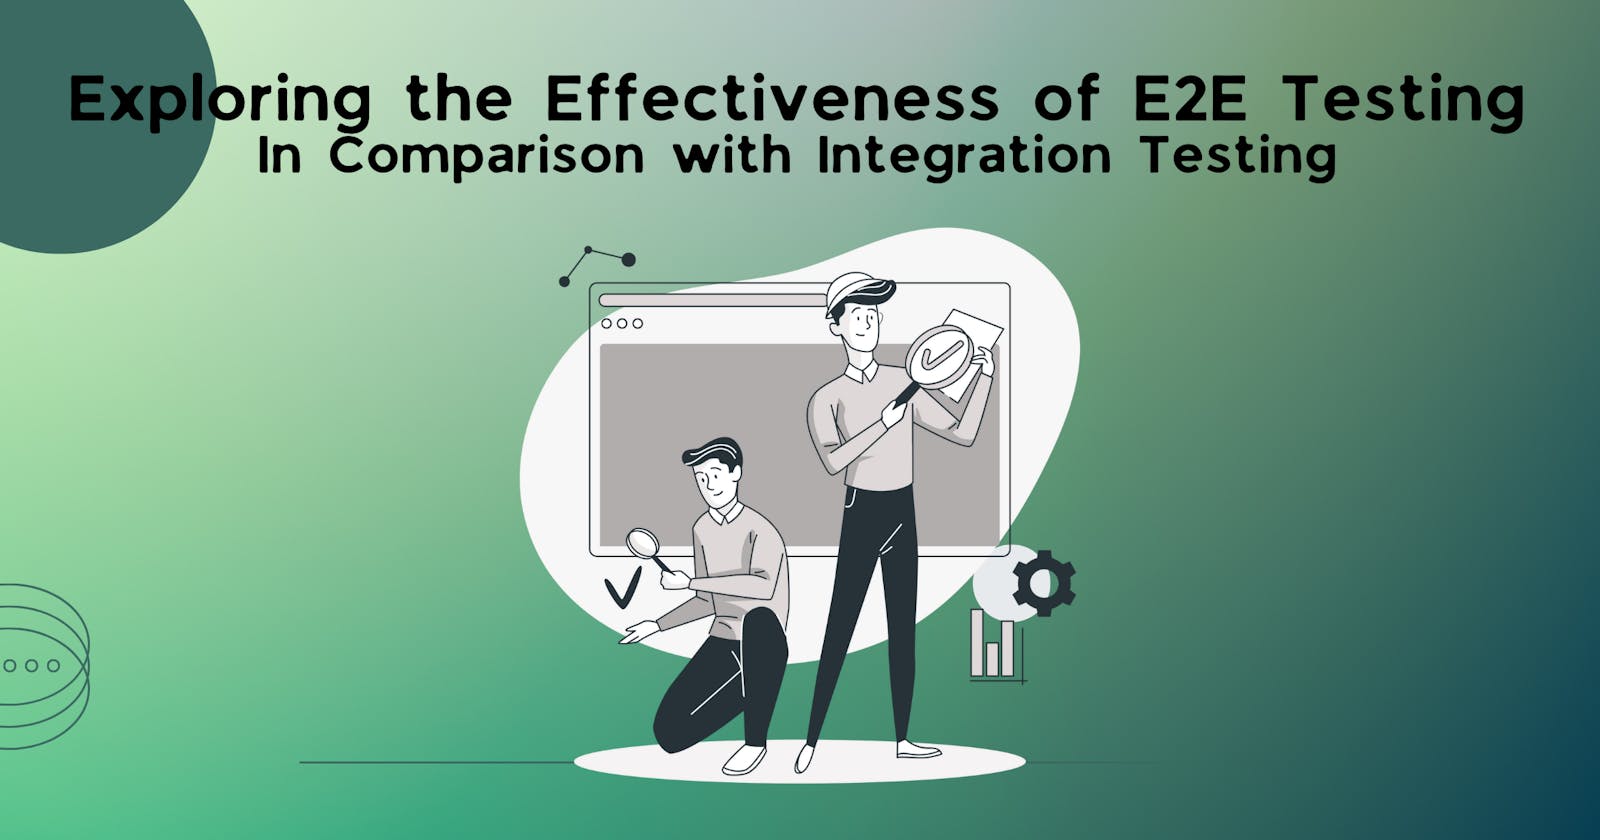 Exploring the Effectiveness of E2E Testing: In Comparison with Integration Testing